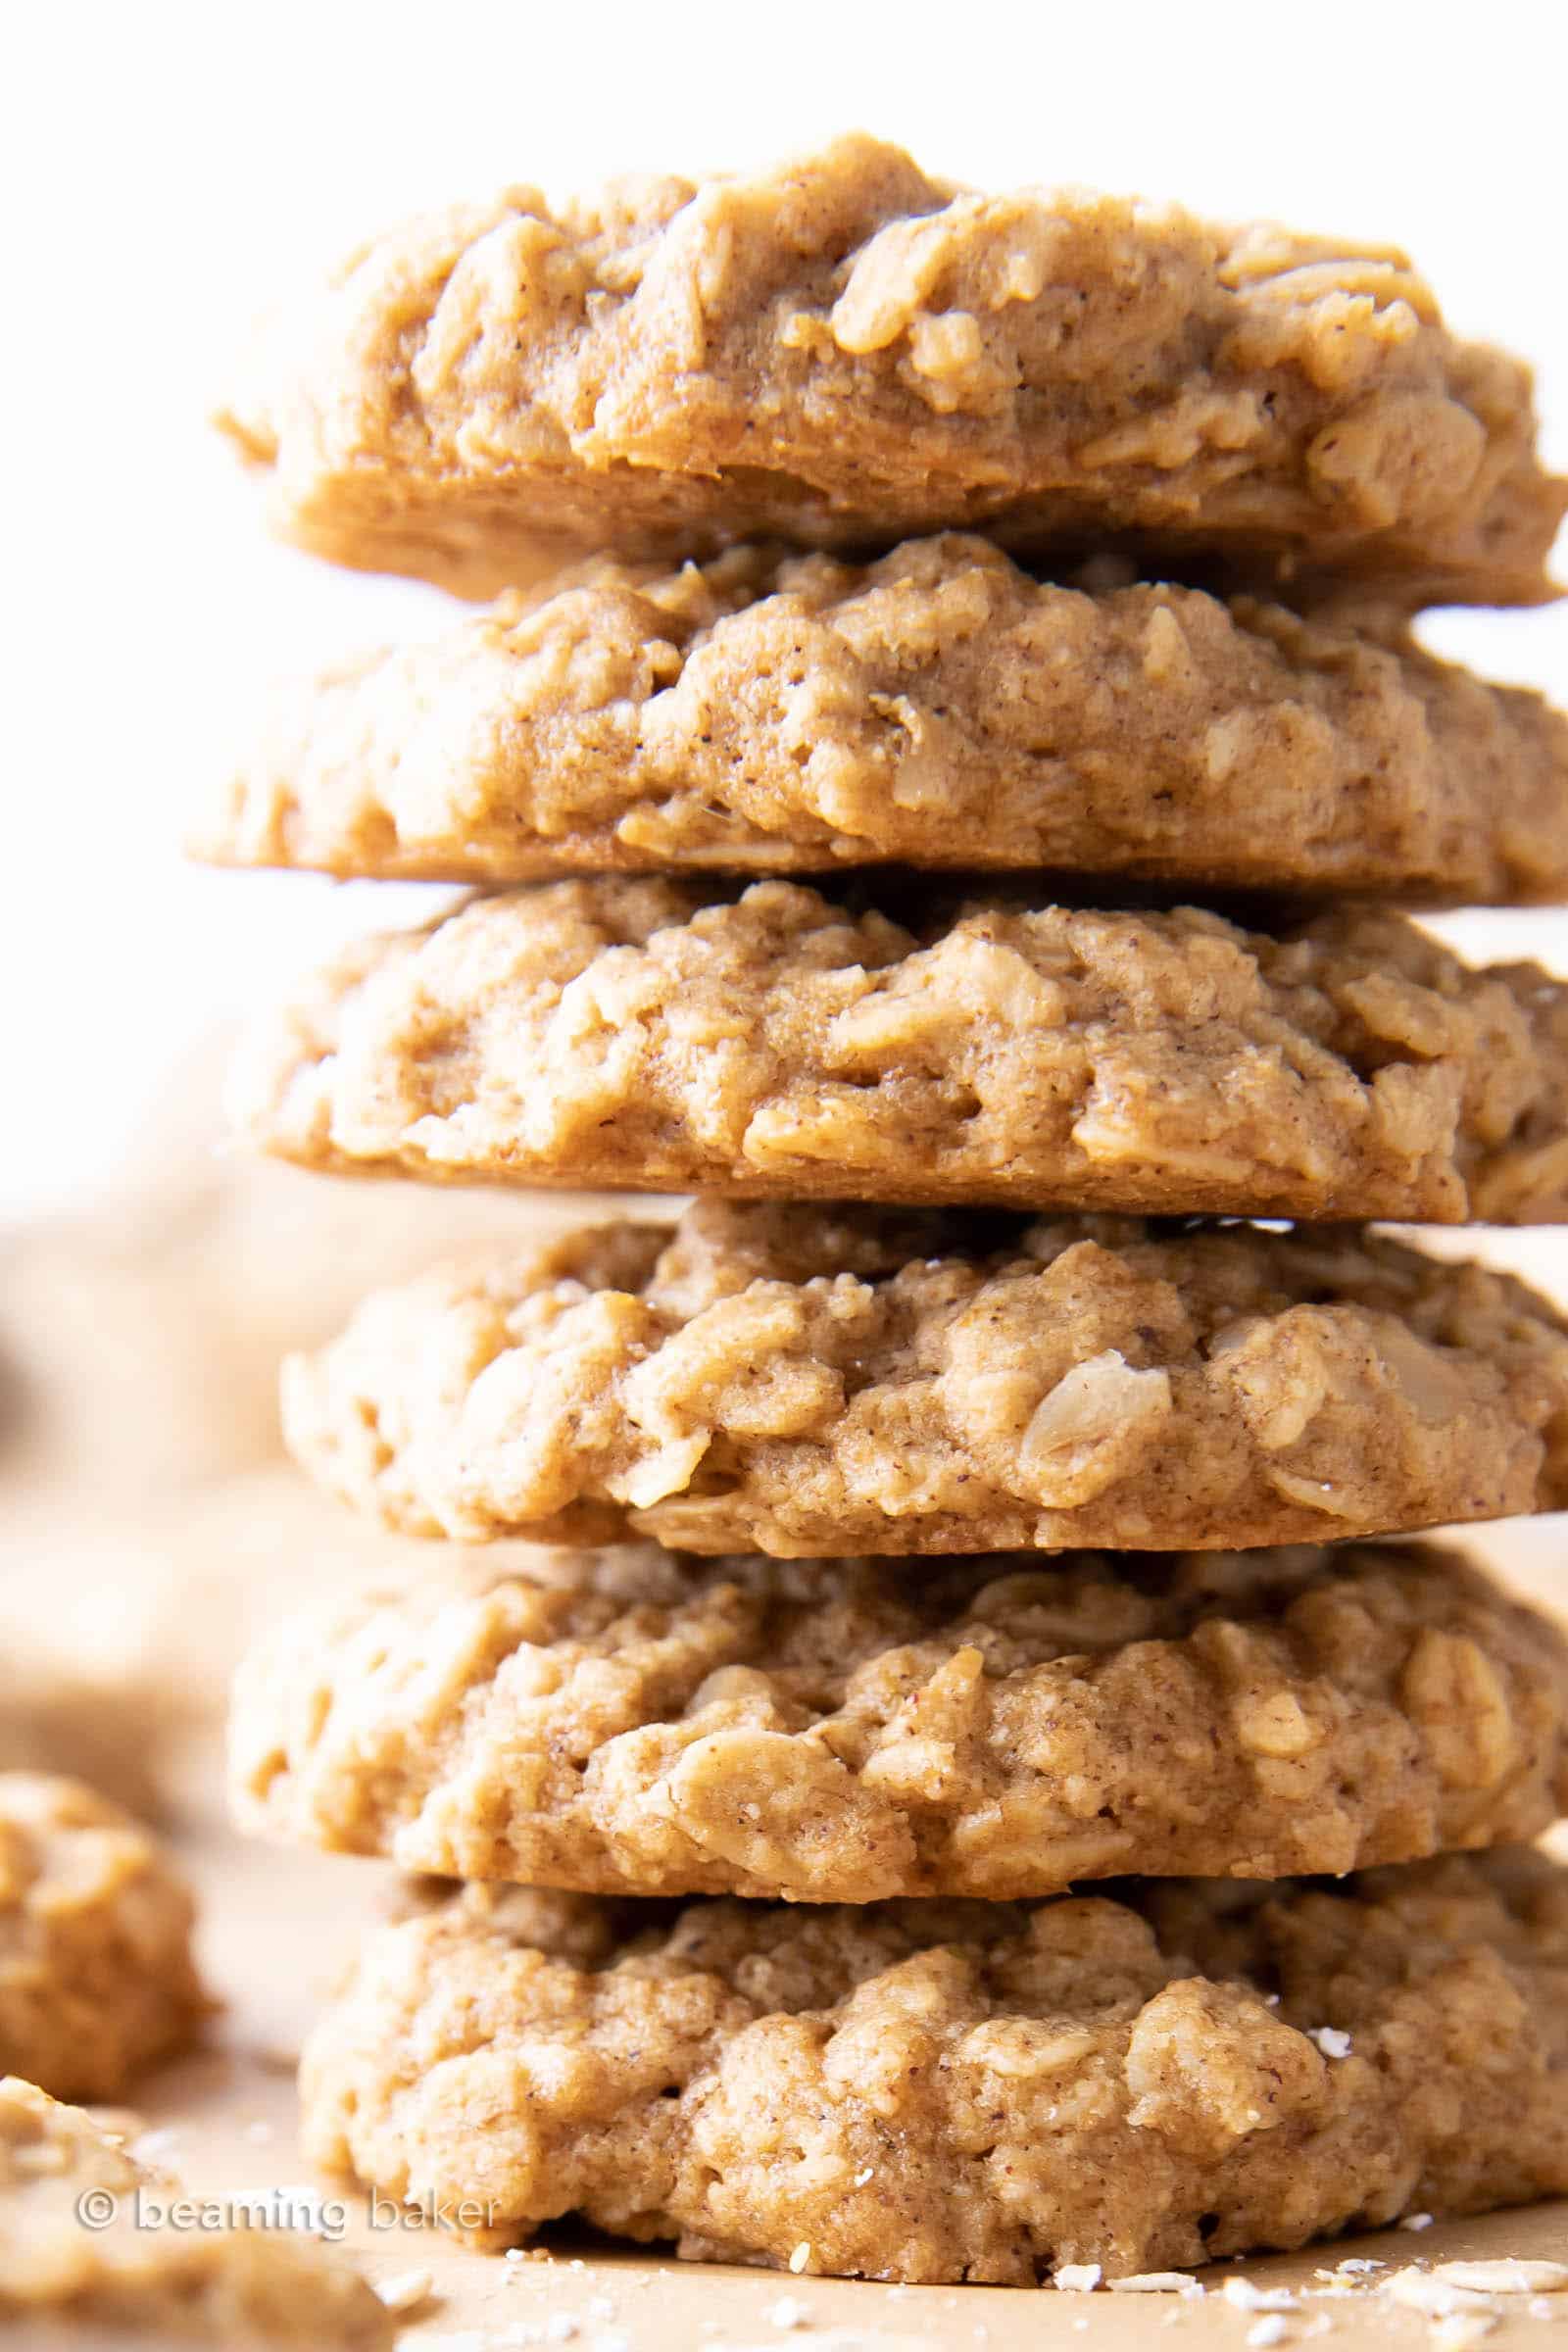 Healthy Oatmeal Cookies: this healthy oatmeal cookie recipe yields lightly sweet healthy oatmeal cookies with spiced, buttery-rich flavor, lightly crispy edges and a tender moist, interior. #Healthy #Oatmeal #Cookies | Recipe at BeamingBaker.com